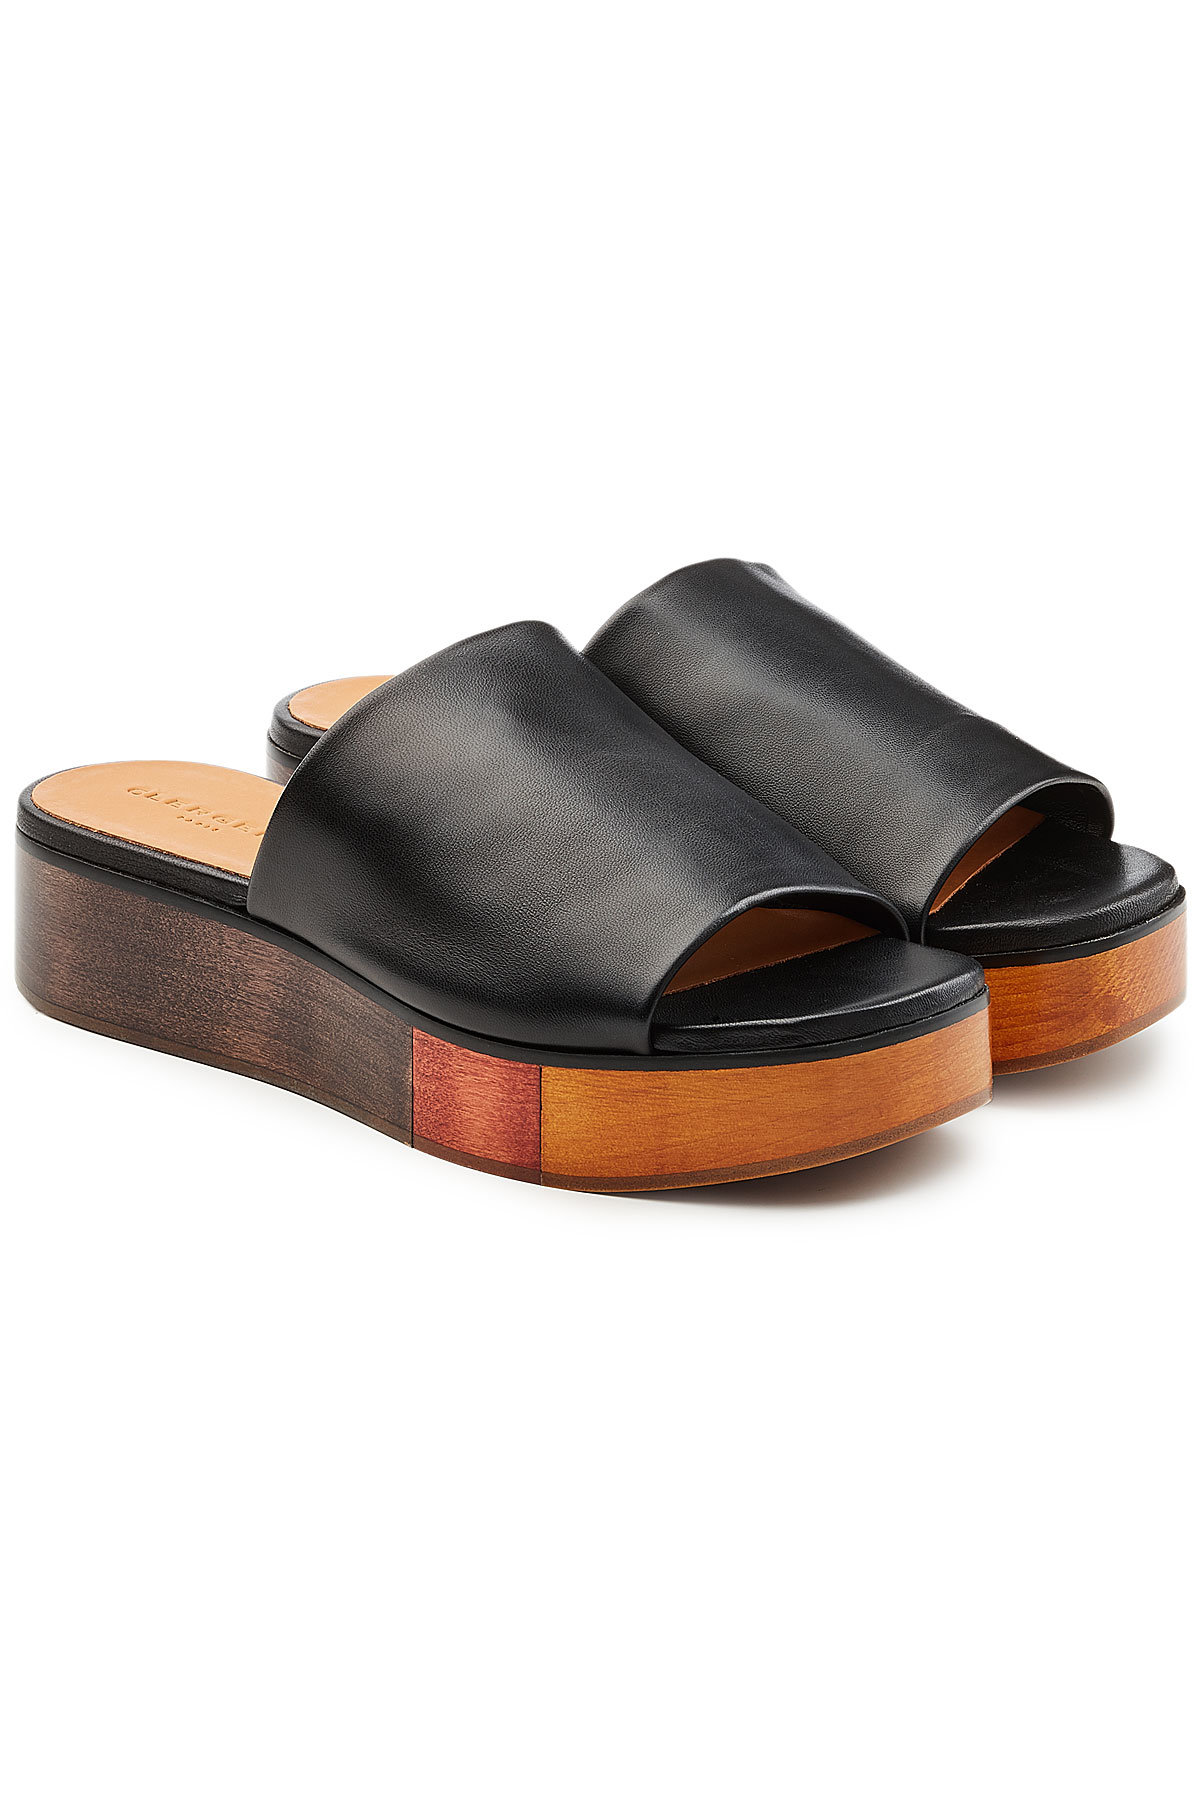 Robert Clergerie - Quena Leather Slip-Ons